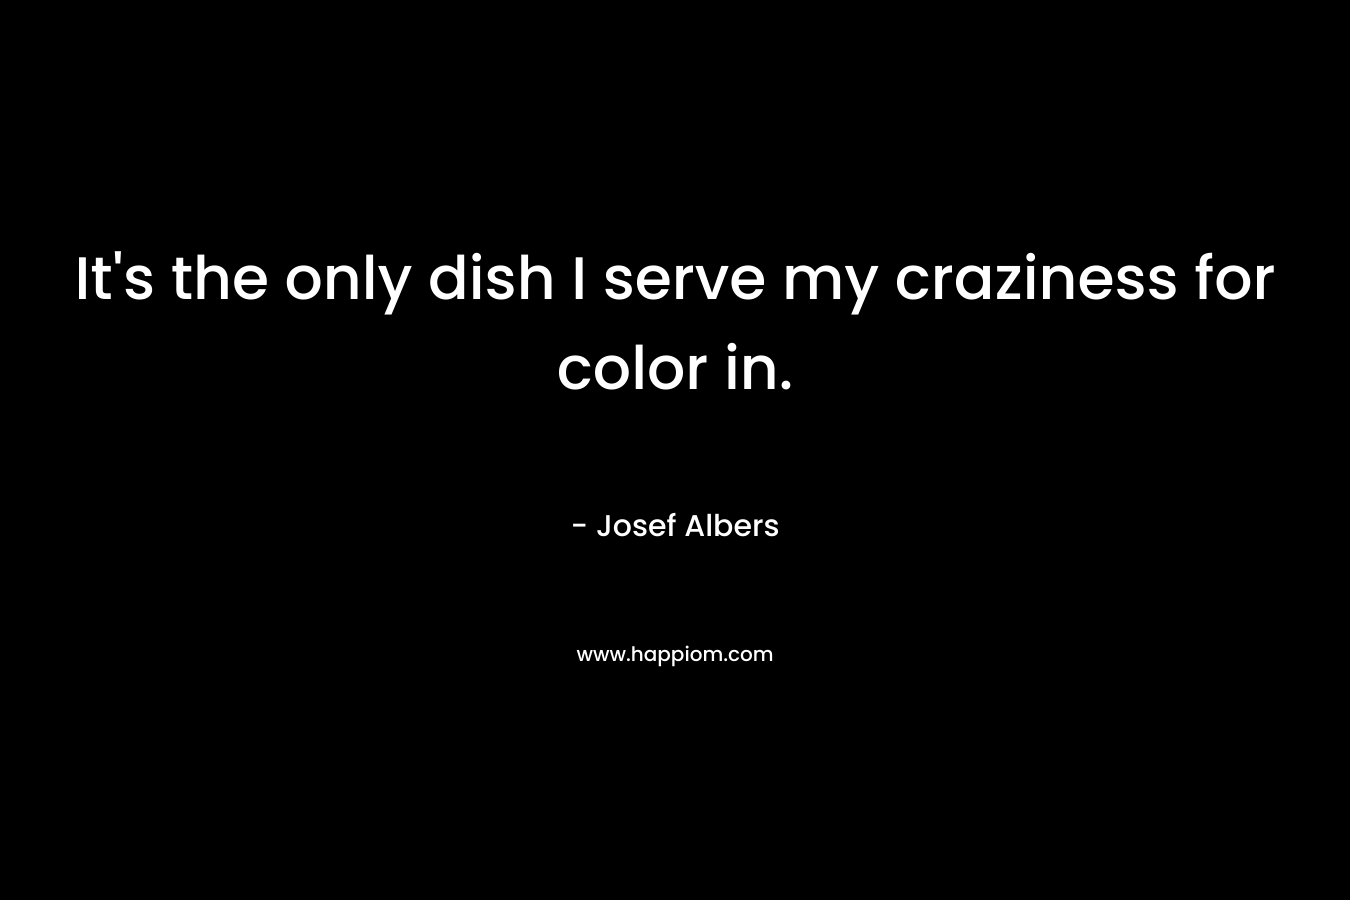 It's the only dish I serve my craziness for color in.